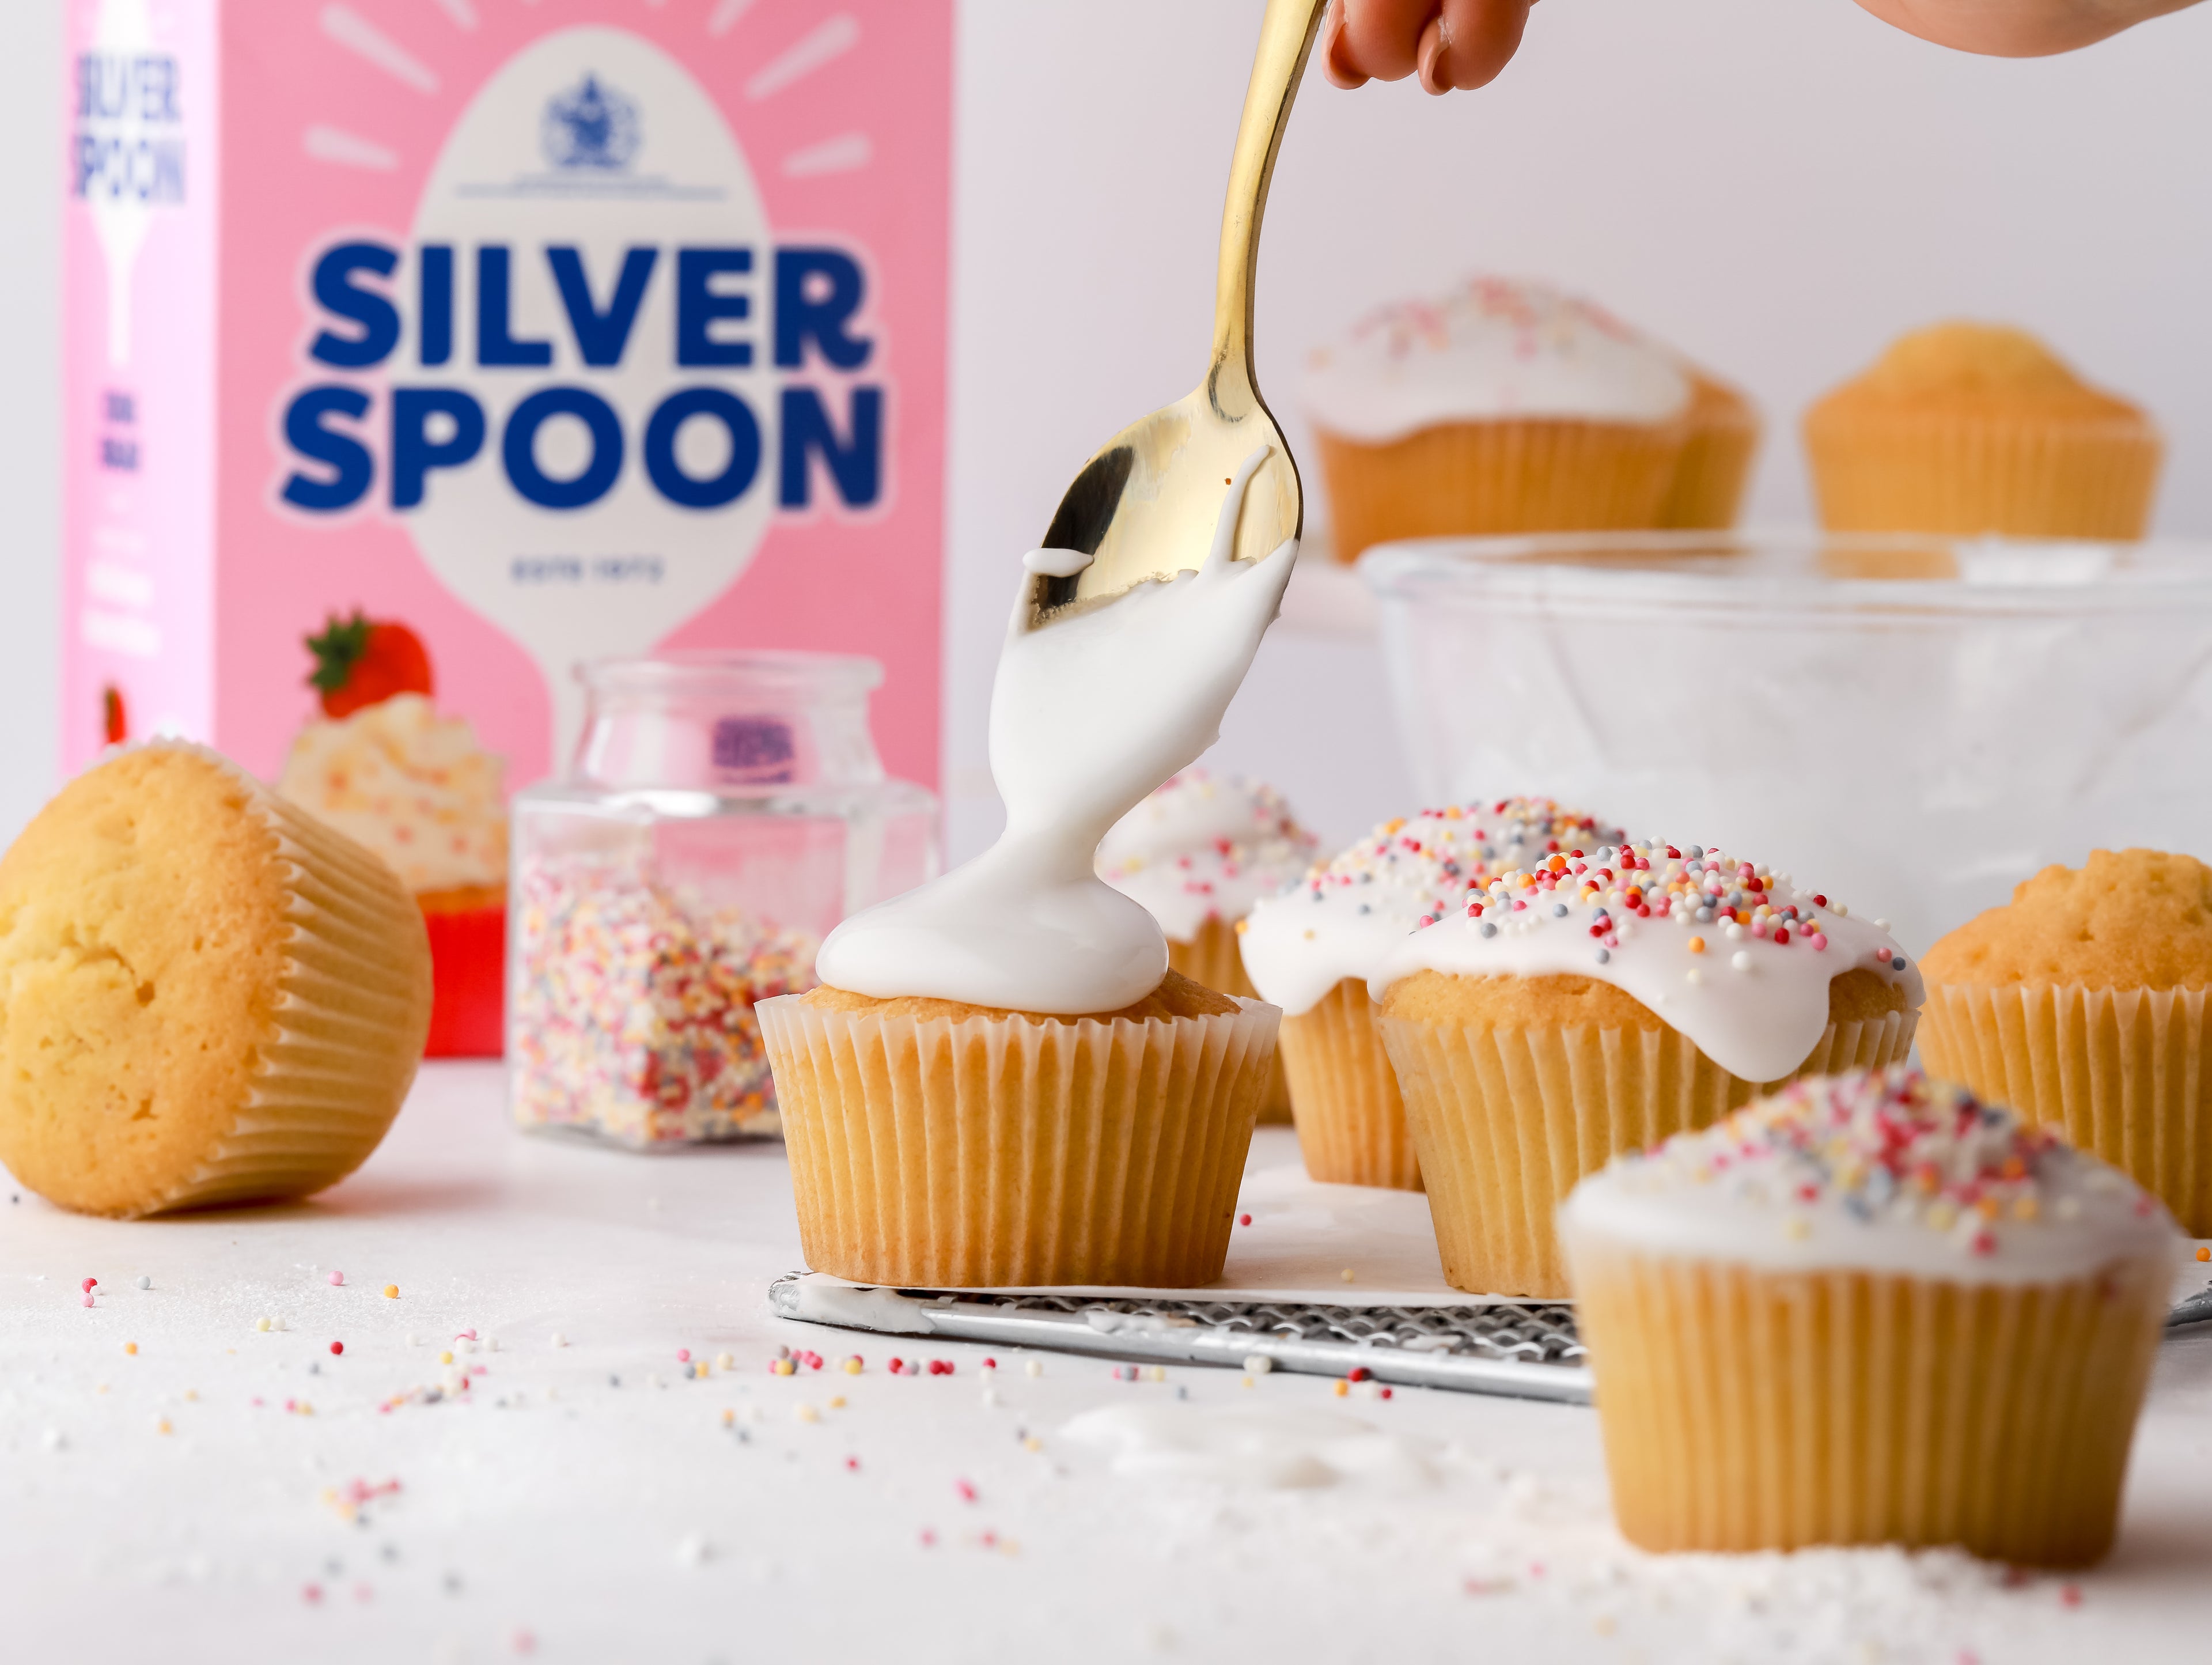 Icing being spooned on top of cupcakes with a jar of sprinkles and pack of icing sugar beside